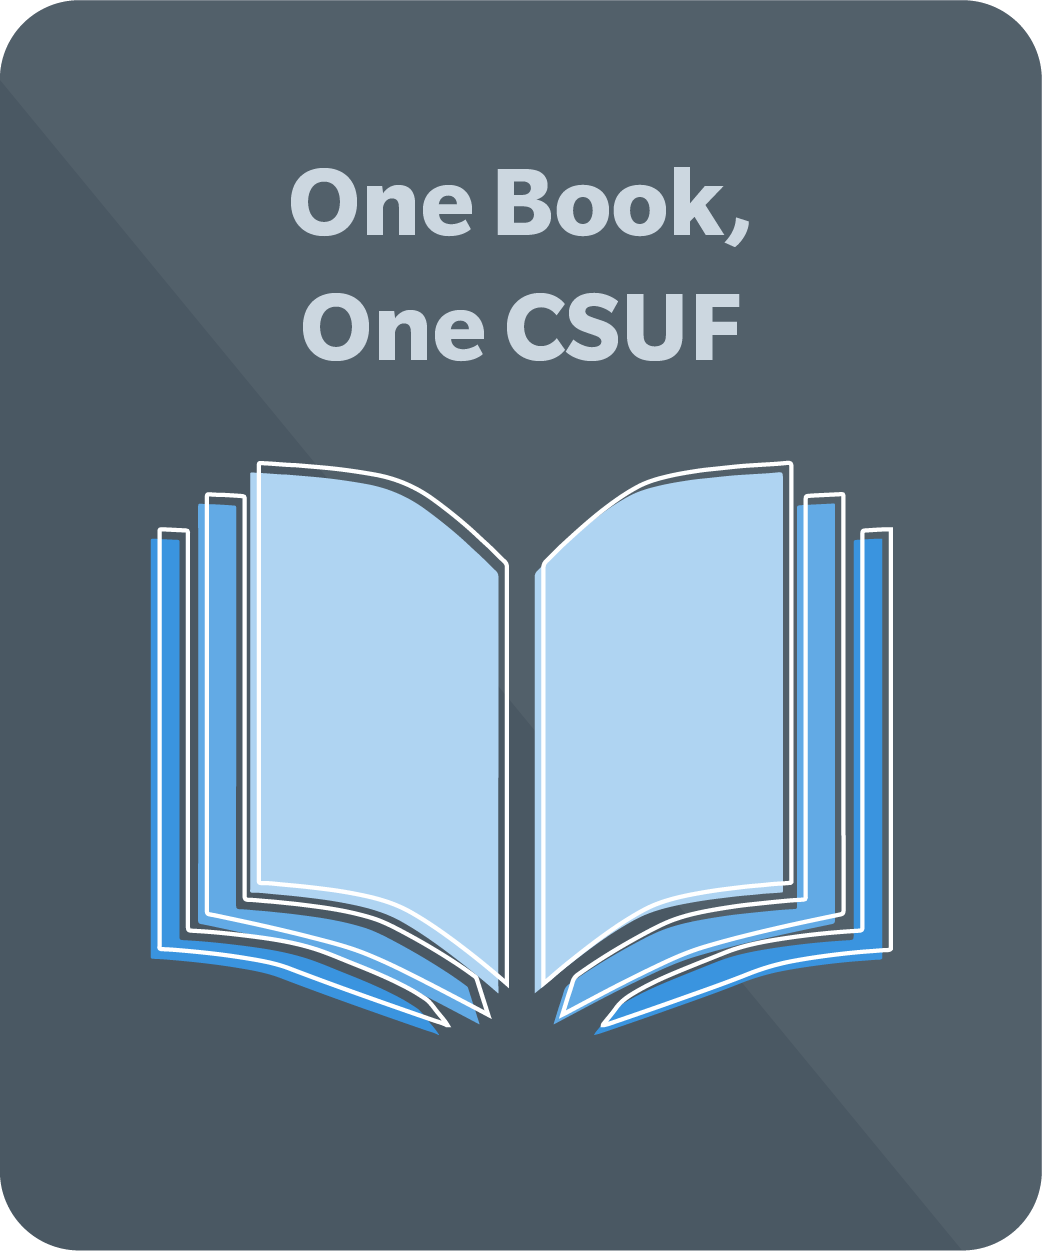 One Book, One CSUF, Icon of a book